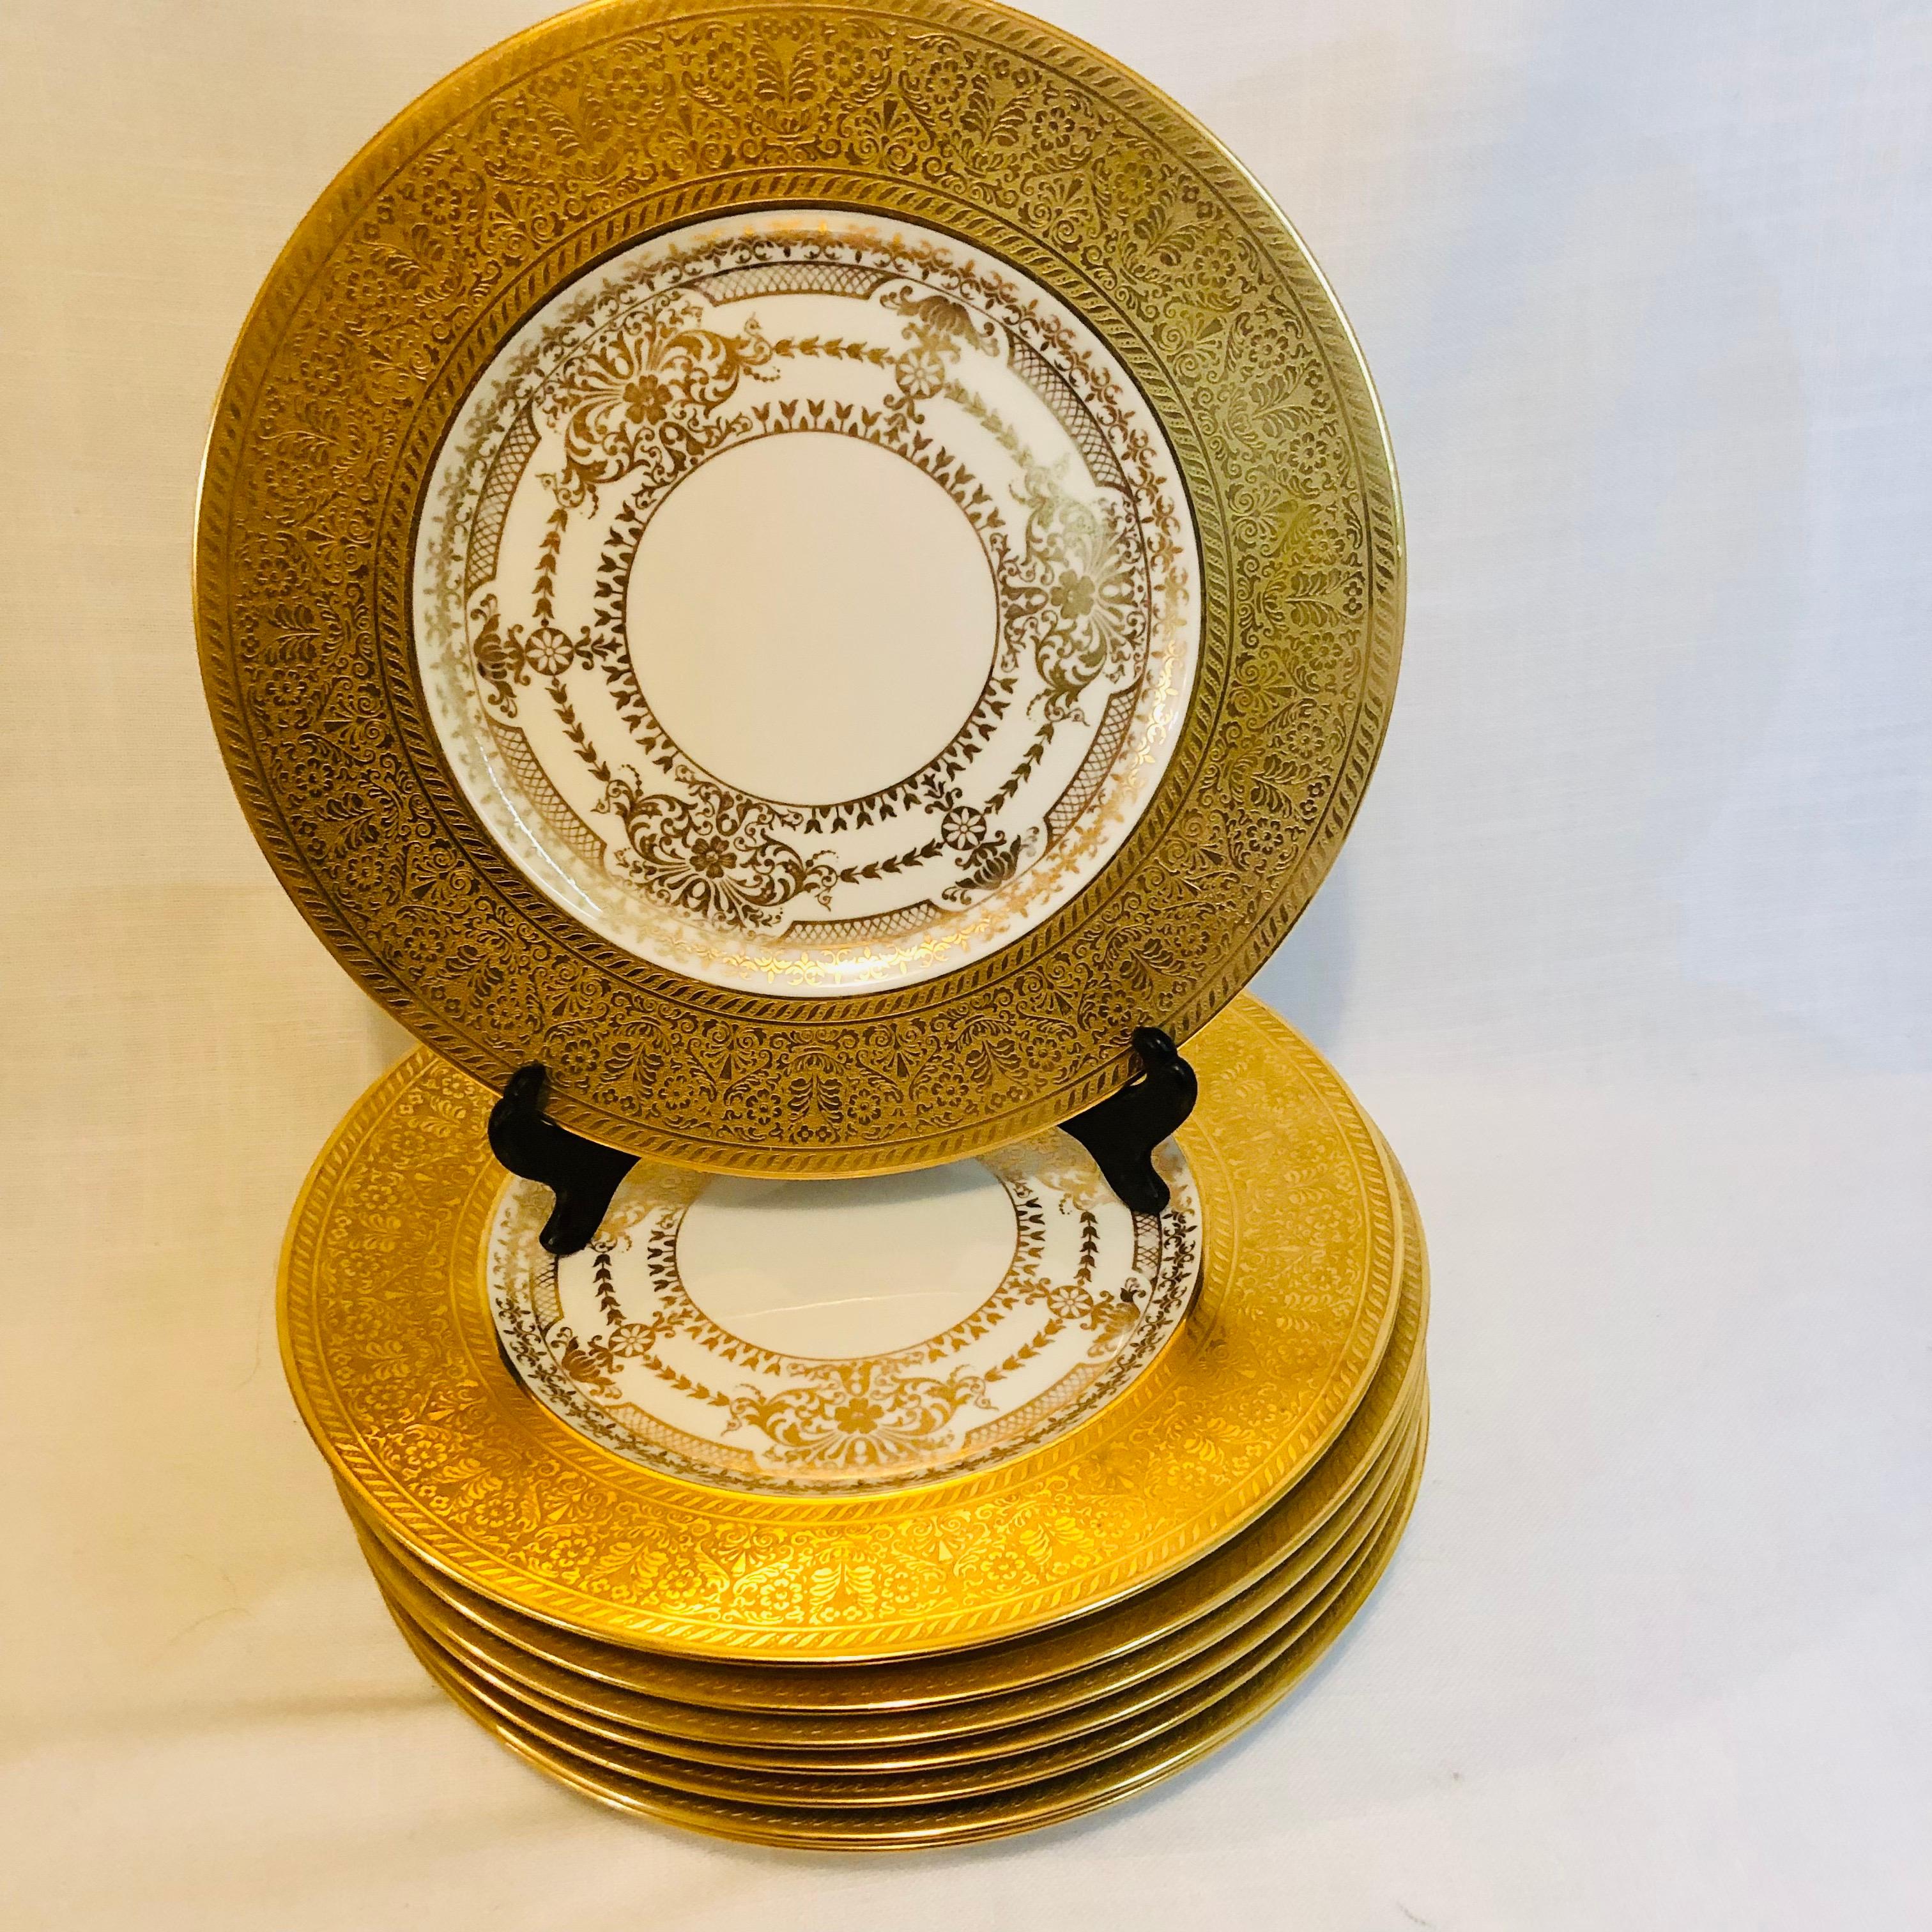 Belle Époque Set of 8 Bavarian Service Plates with Thick Border of Gold Embossed Decoration